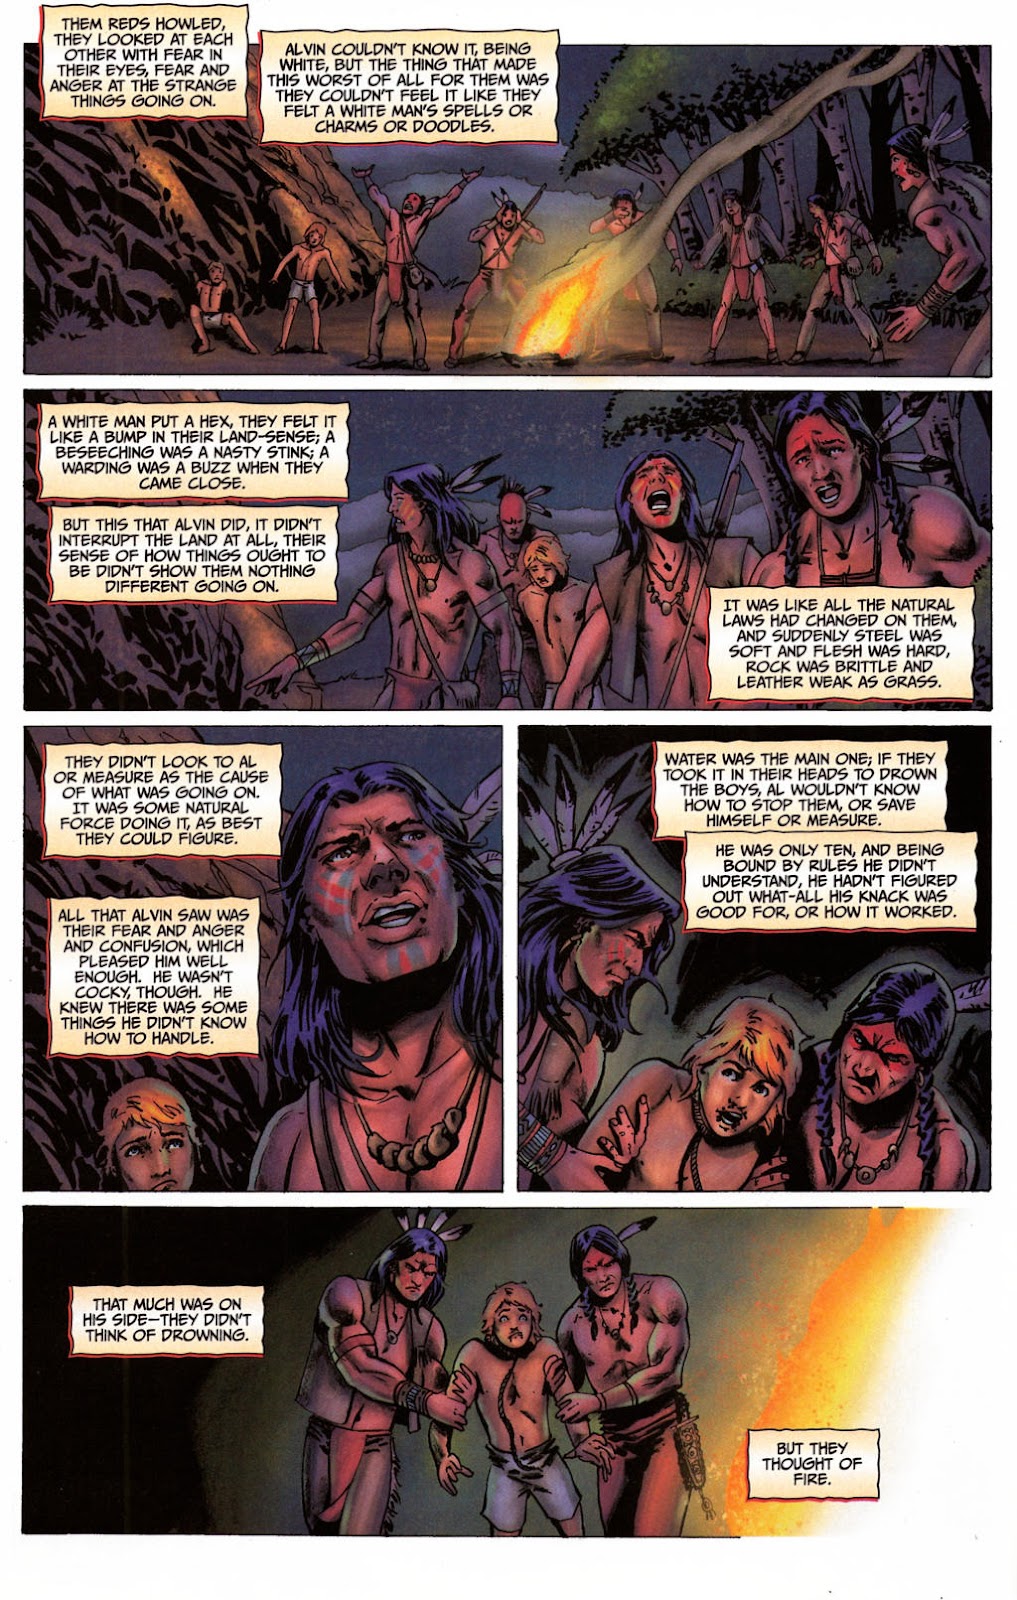 Red Prophet: The Tales of Alvin Maker issue 5 - Page 14